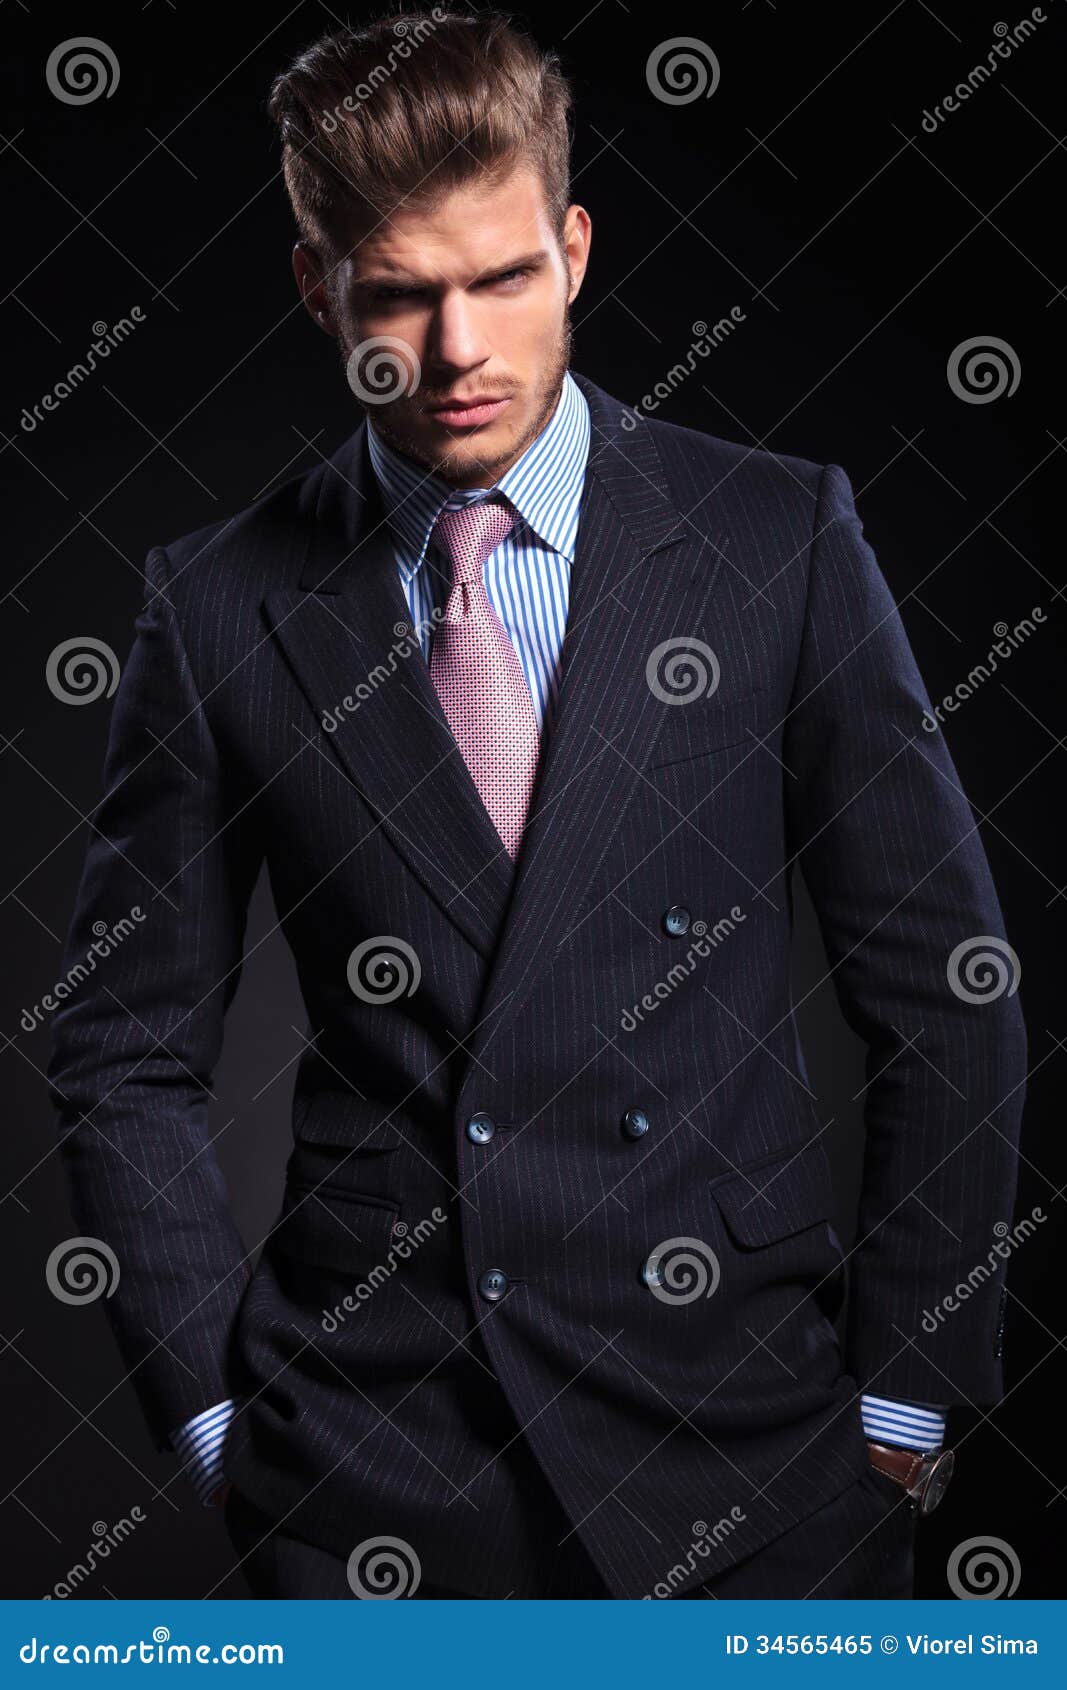 Business Man Standing with His Hands in Pockets Stock Image - Image of ...